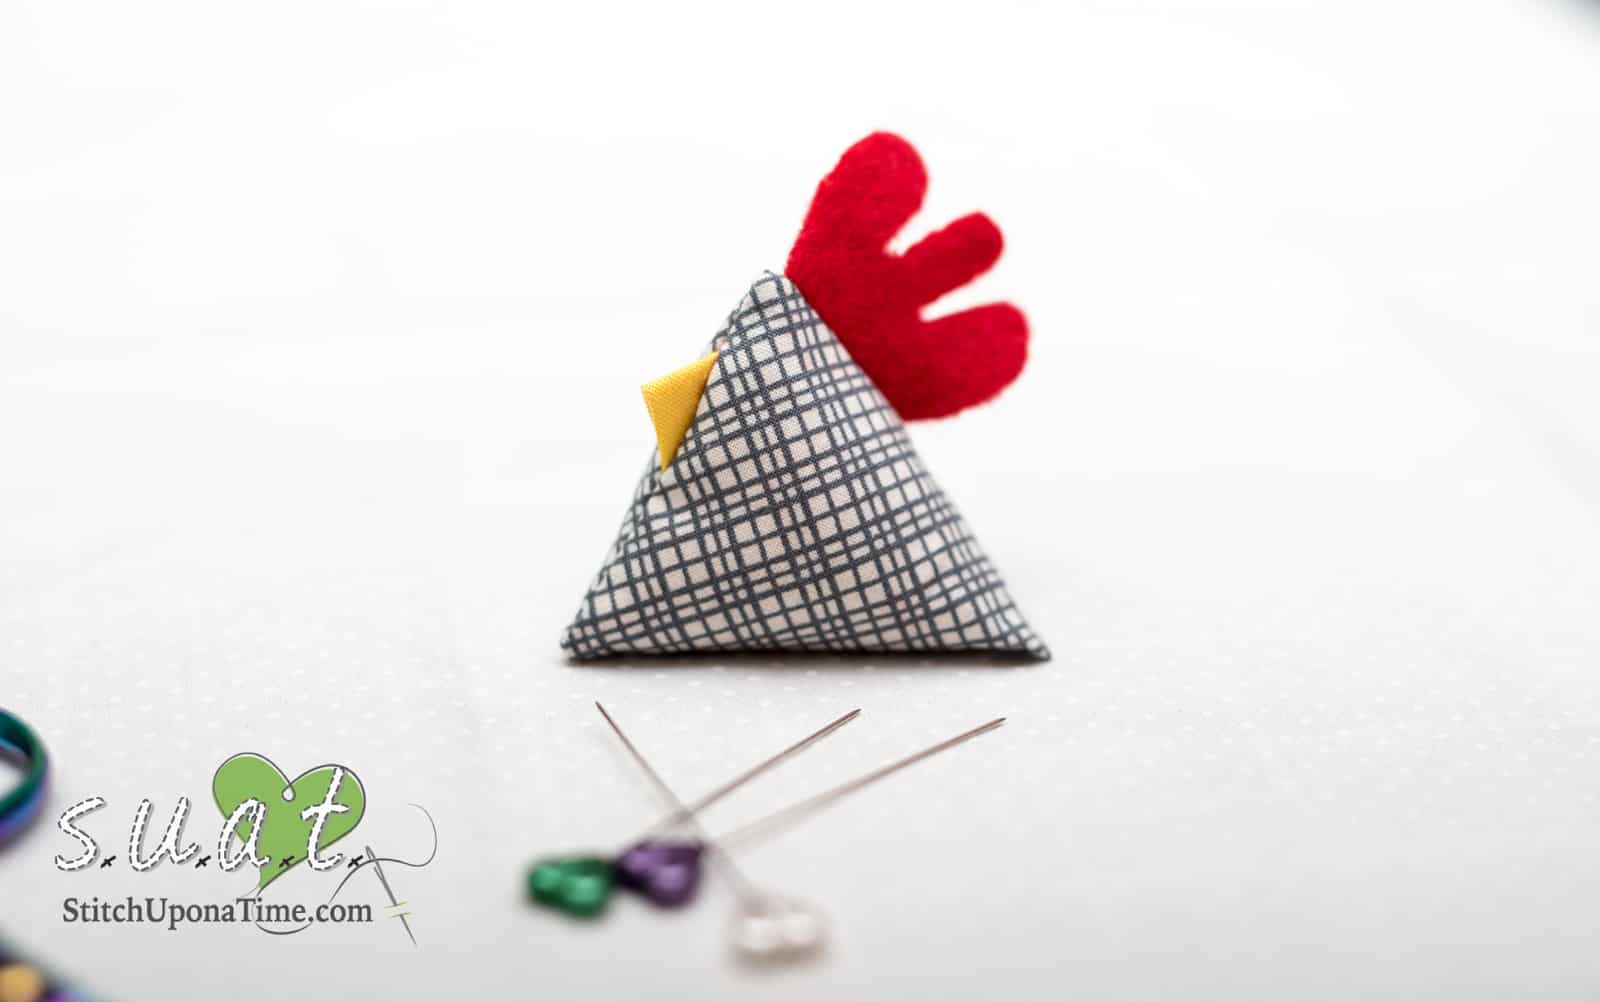 How-To: Triangle Sewing Pattern Weights - Make